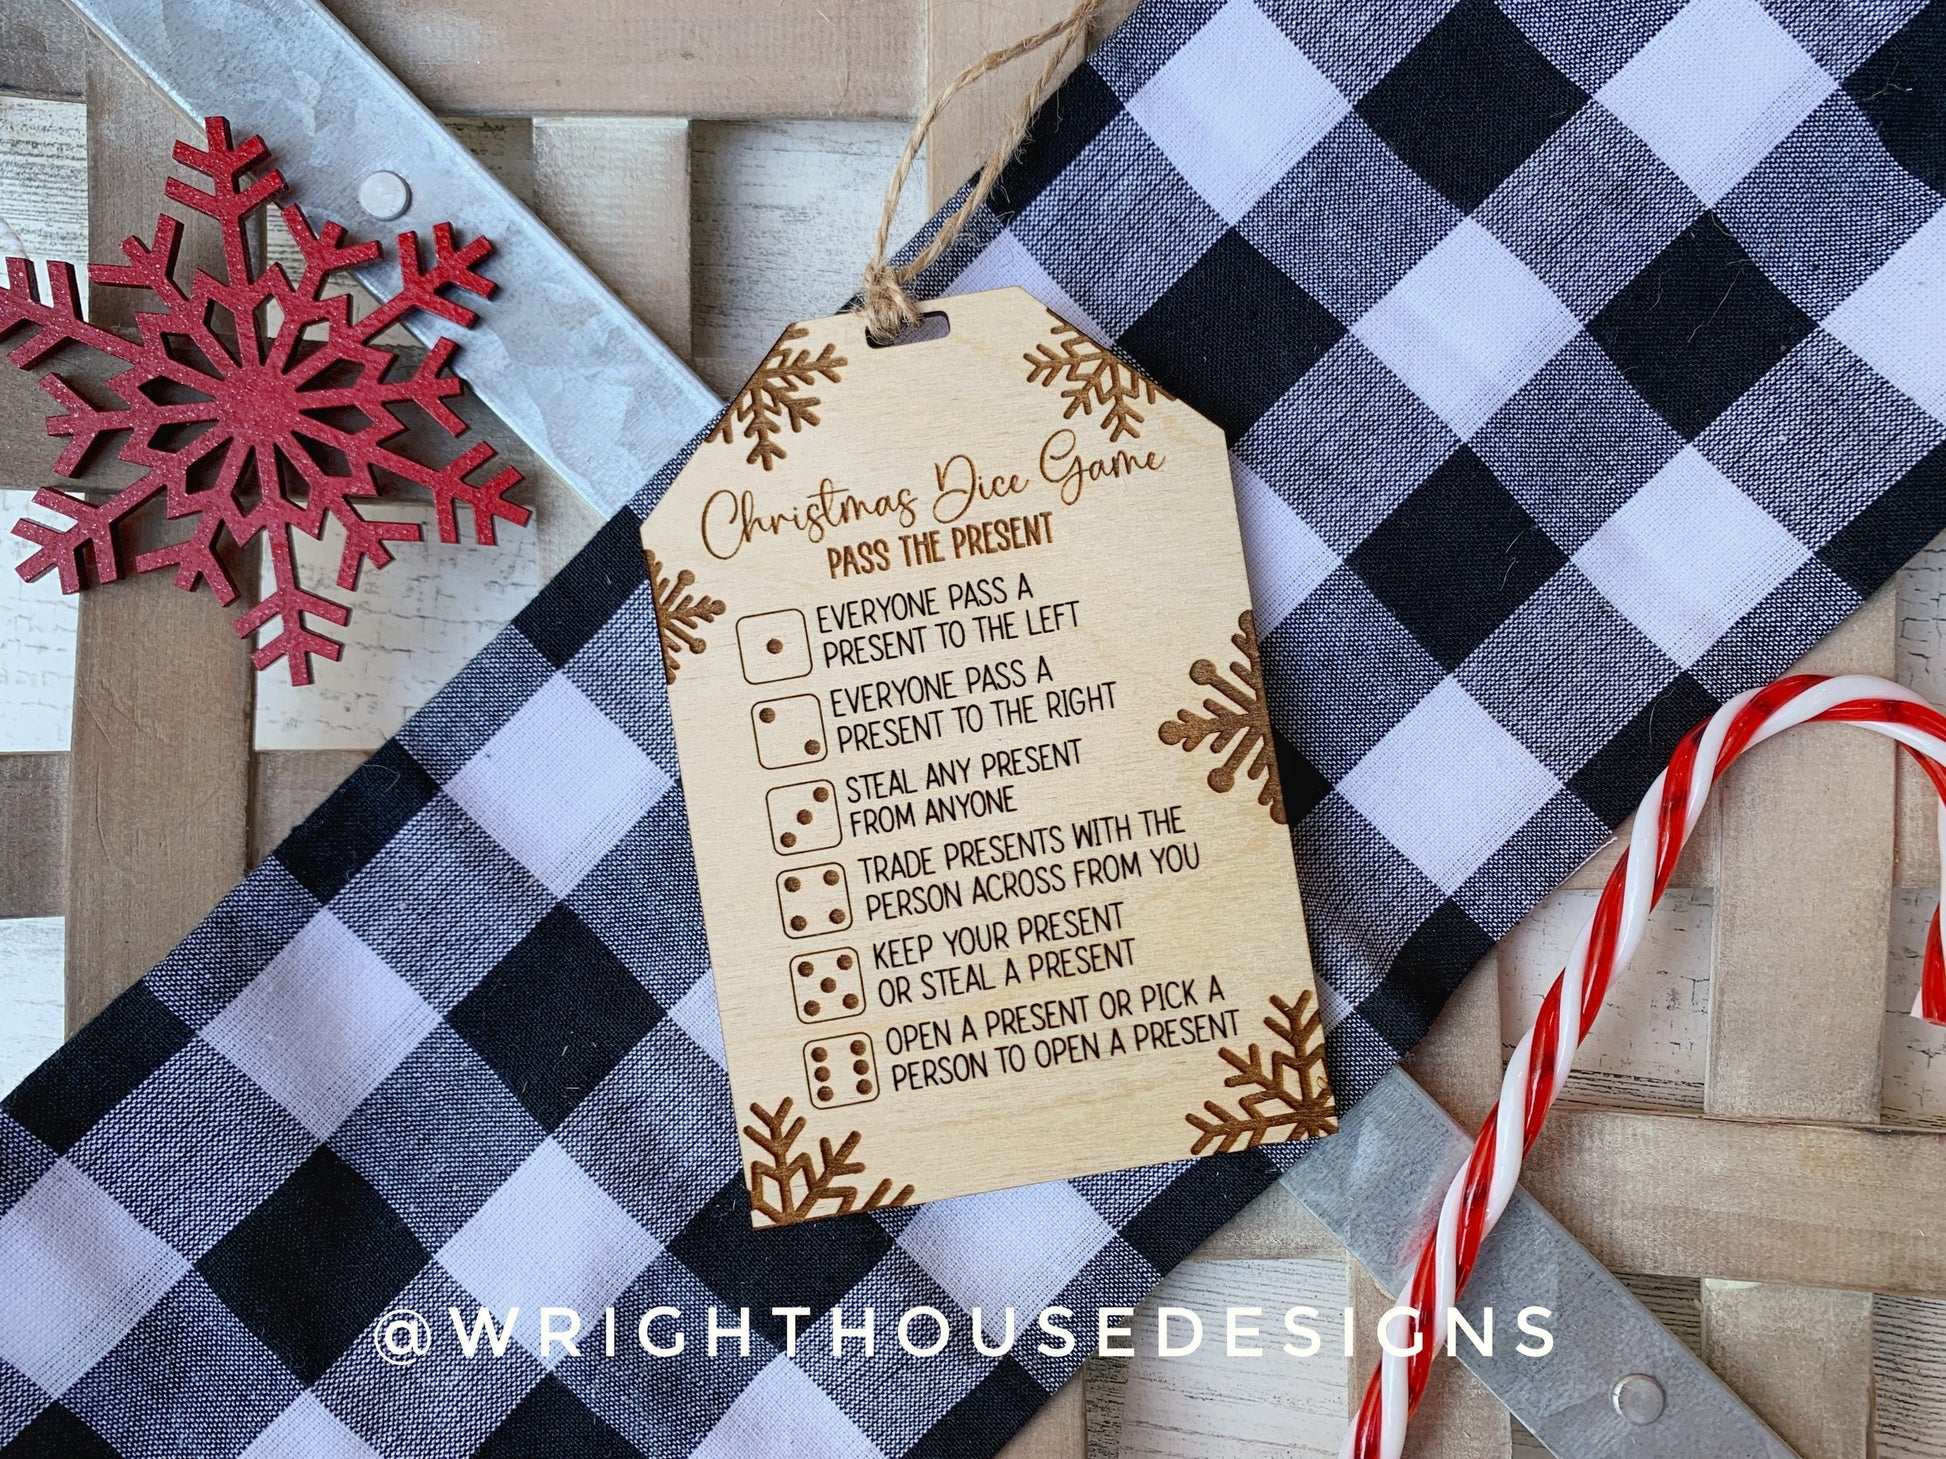 Christmas Dice Game Tags Set 1 - Laser Engraved Stocking Stuffer Gifts - Pass The Present - Cut File For Glowforge Lasers - Digital SVG File